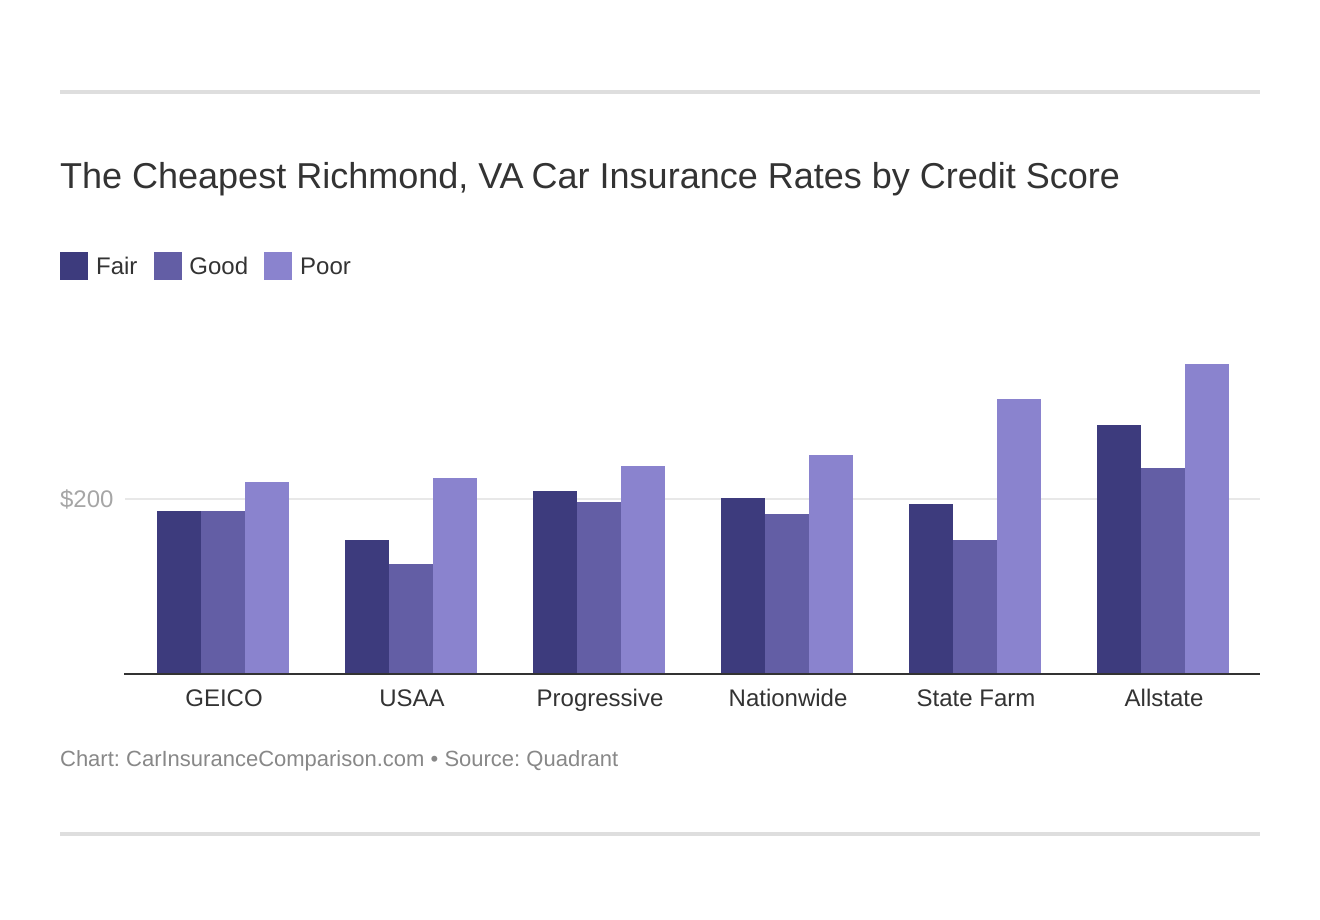 The Cheapest Richmond, VA Car Insurance Rates by Credit Score